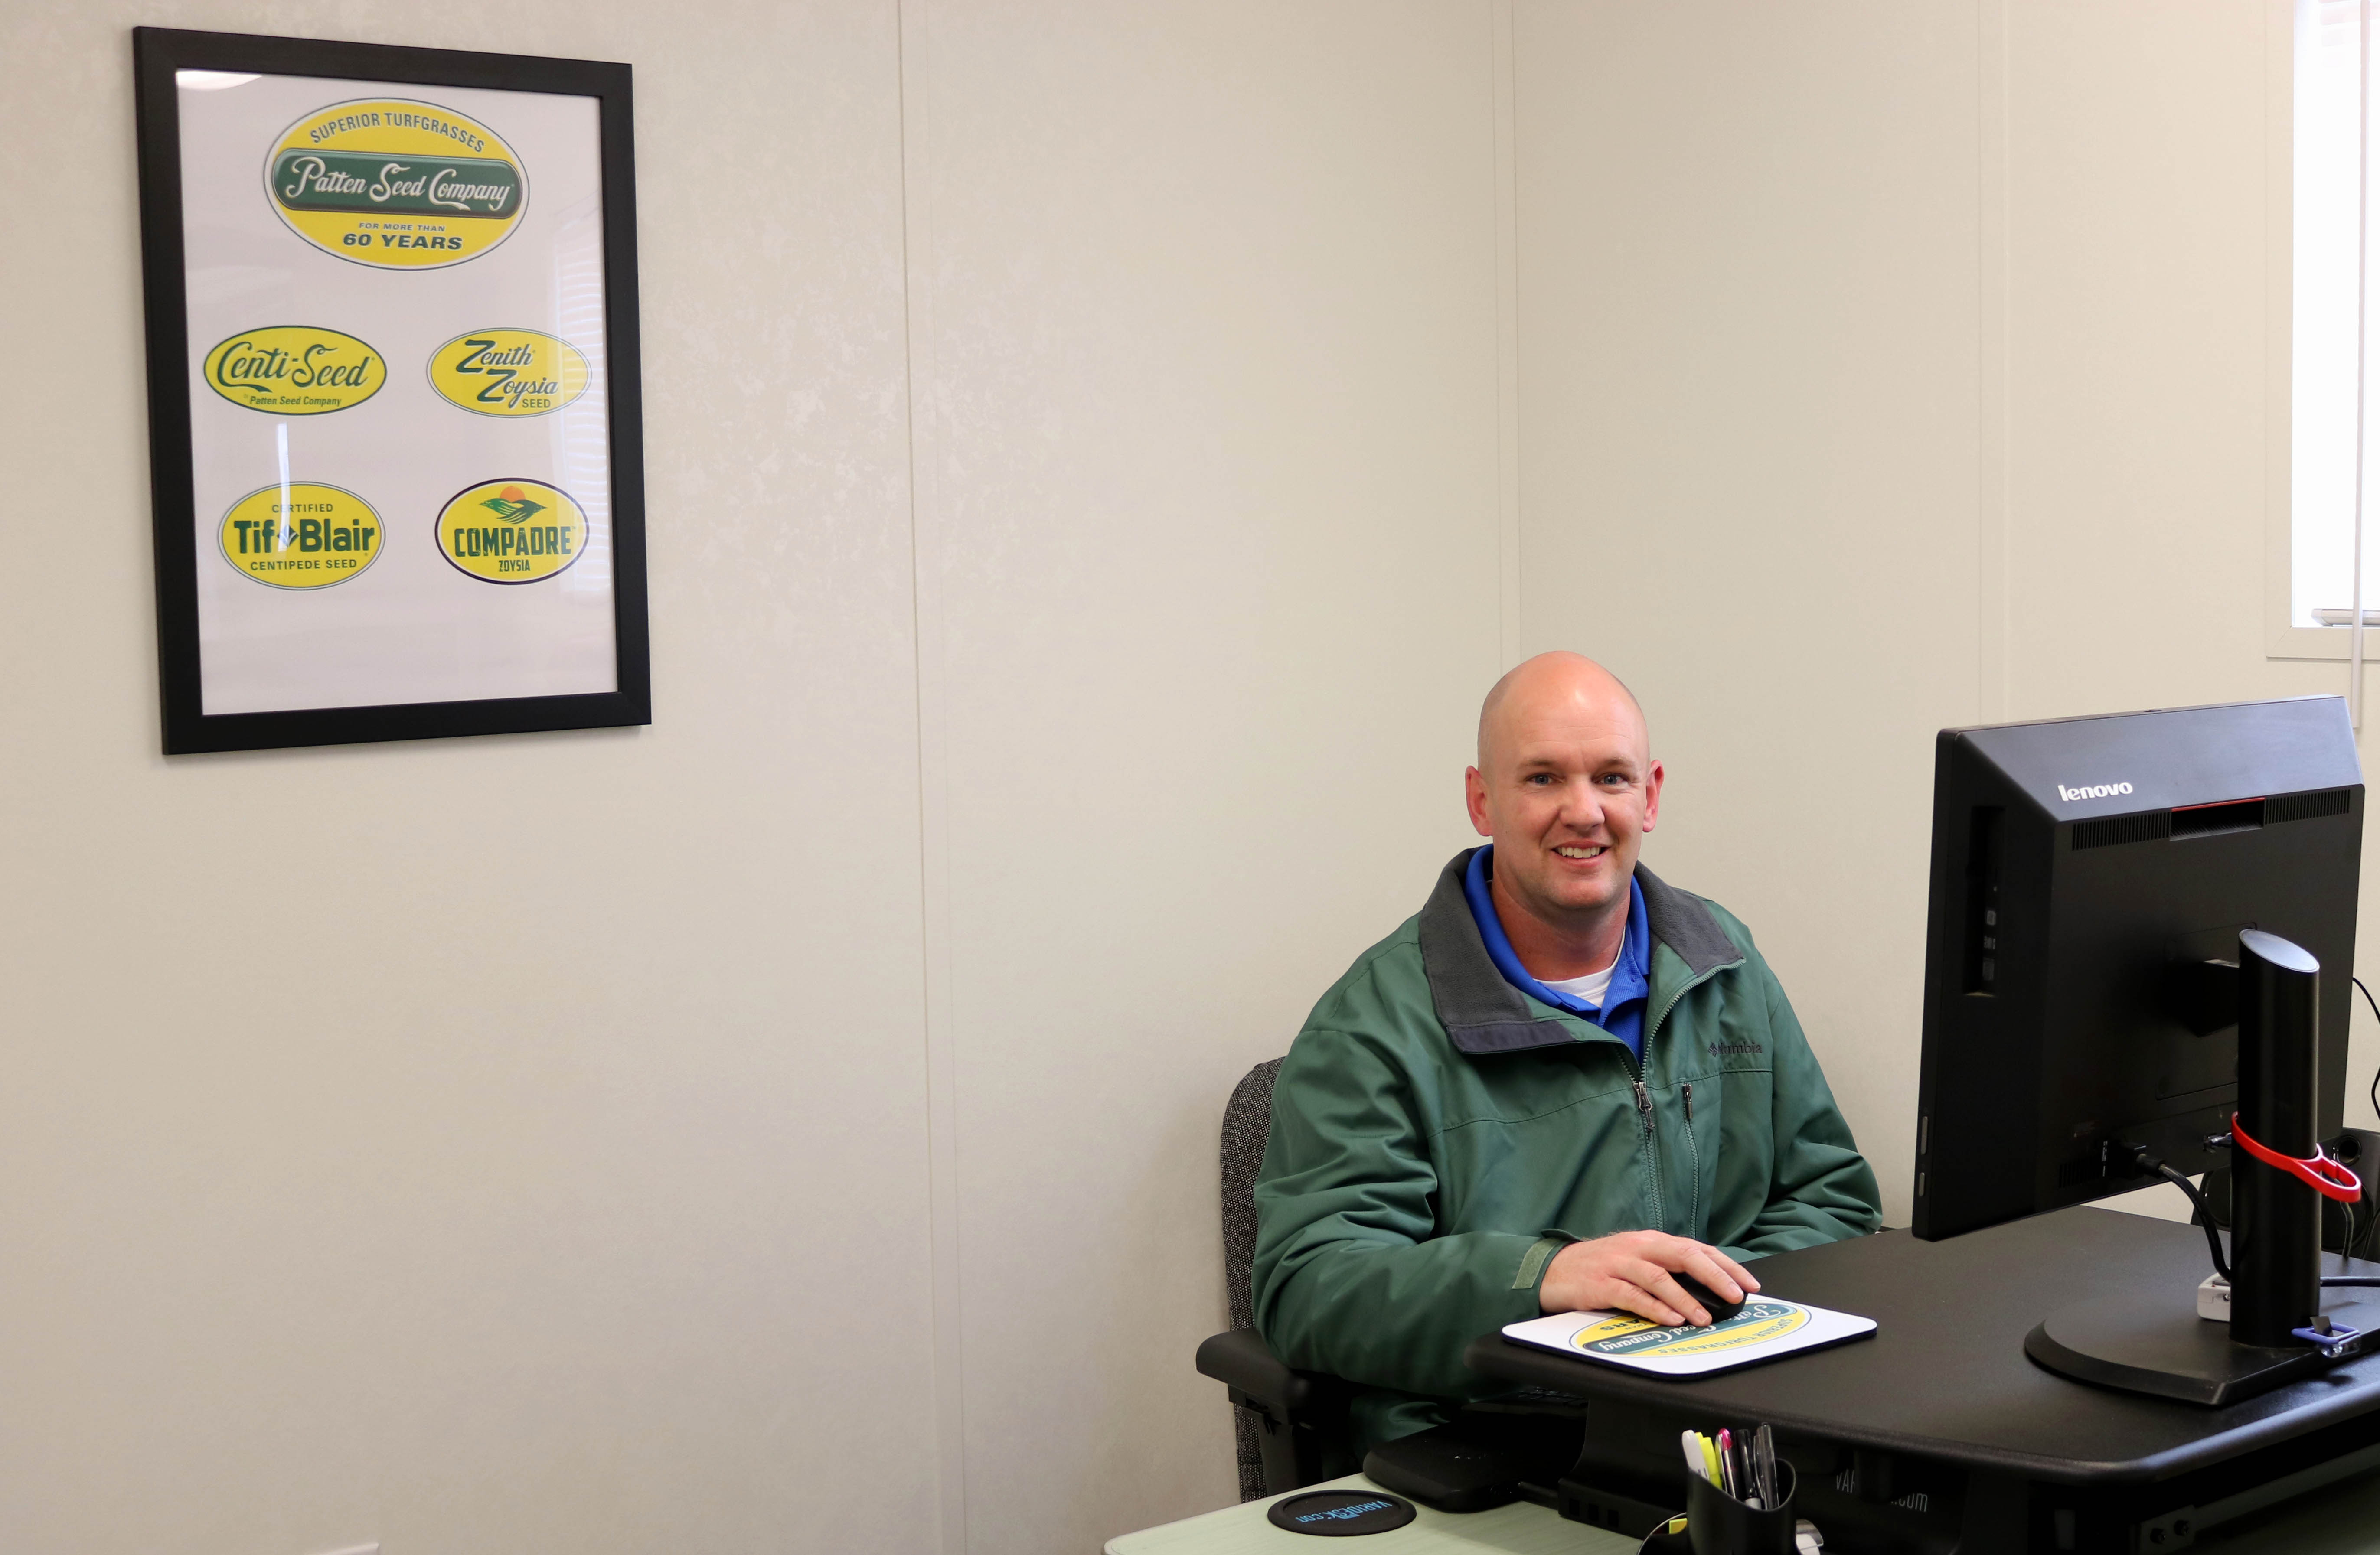 Chris Roquemore leads the team of Patten Seed employees in their new Marshallville office.